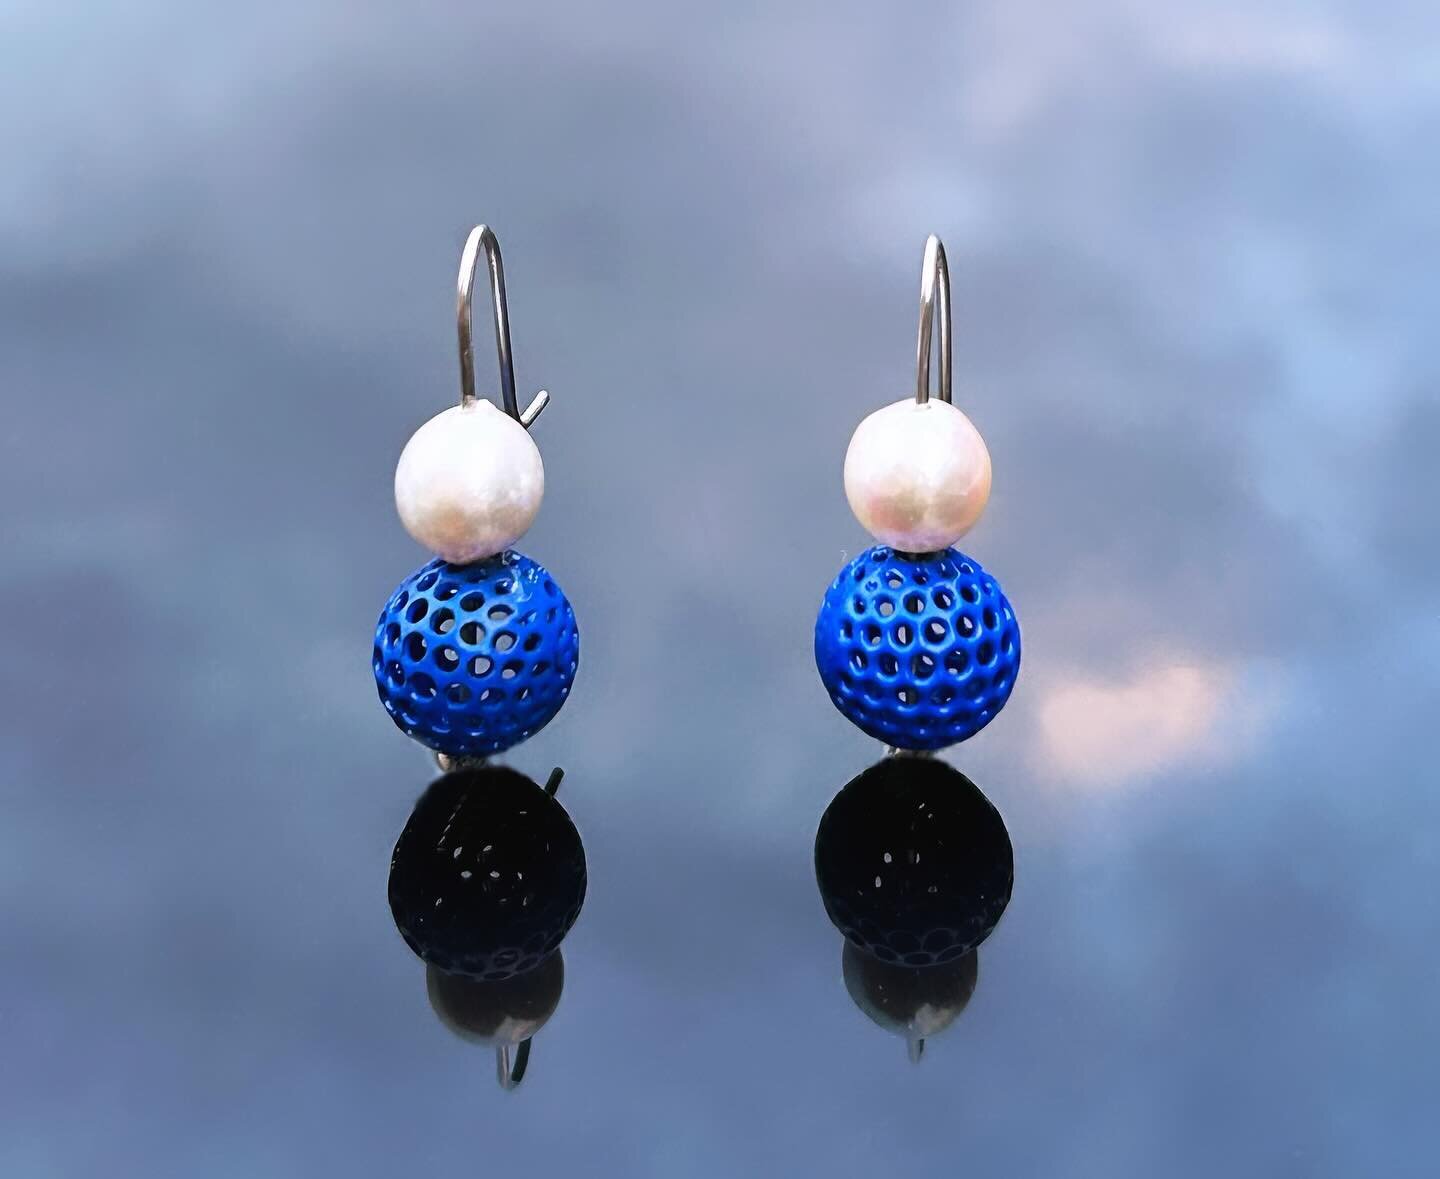 Blue perforated ball with Akoya pearl earrings. Some different combinations with living jewels and geometric handmade balls with powder-coated industrial metal. #blueandpearls  #powdercoated #akoyapearl #simpledesign #combinationofnaturalandgeometric